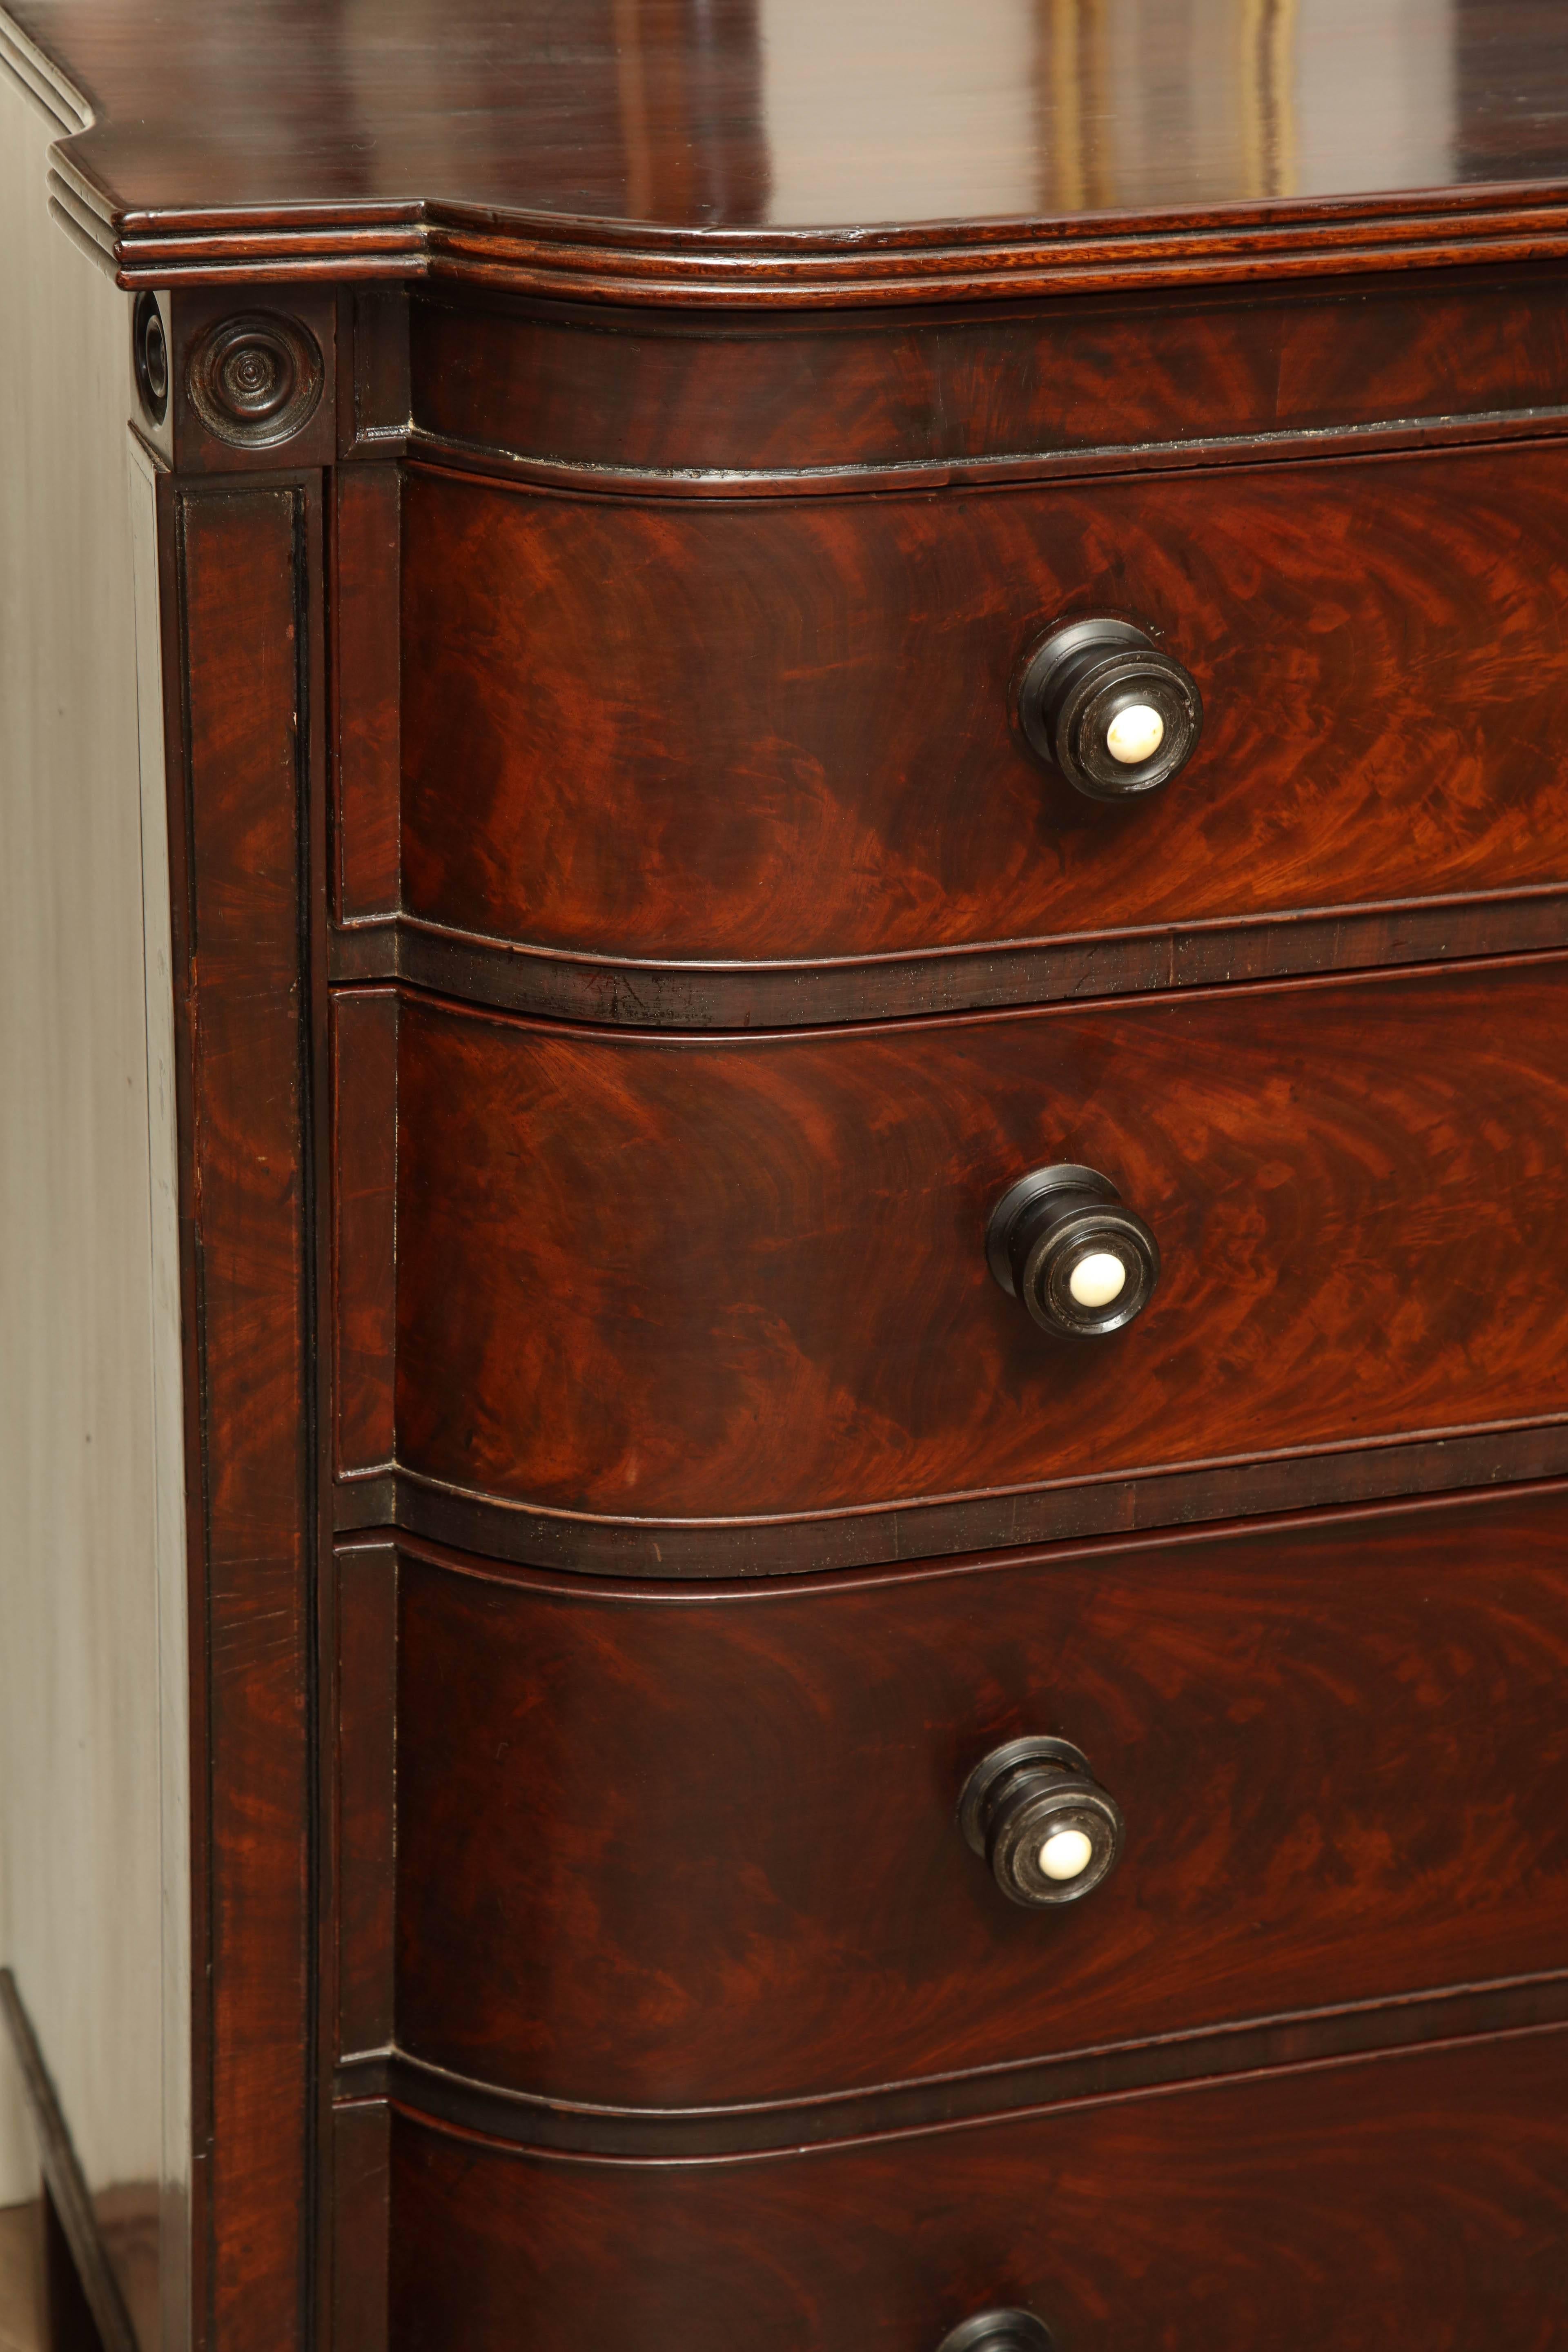 Mid-19th century English, four-drawer chest in mahogany.